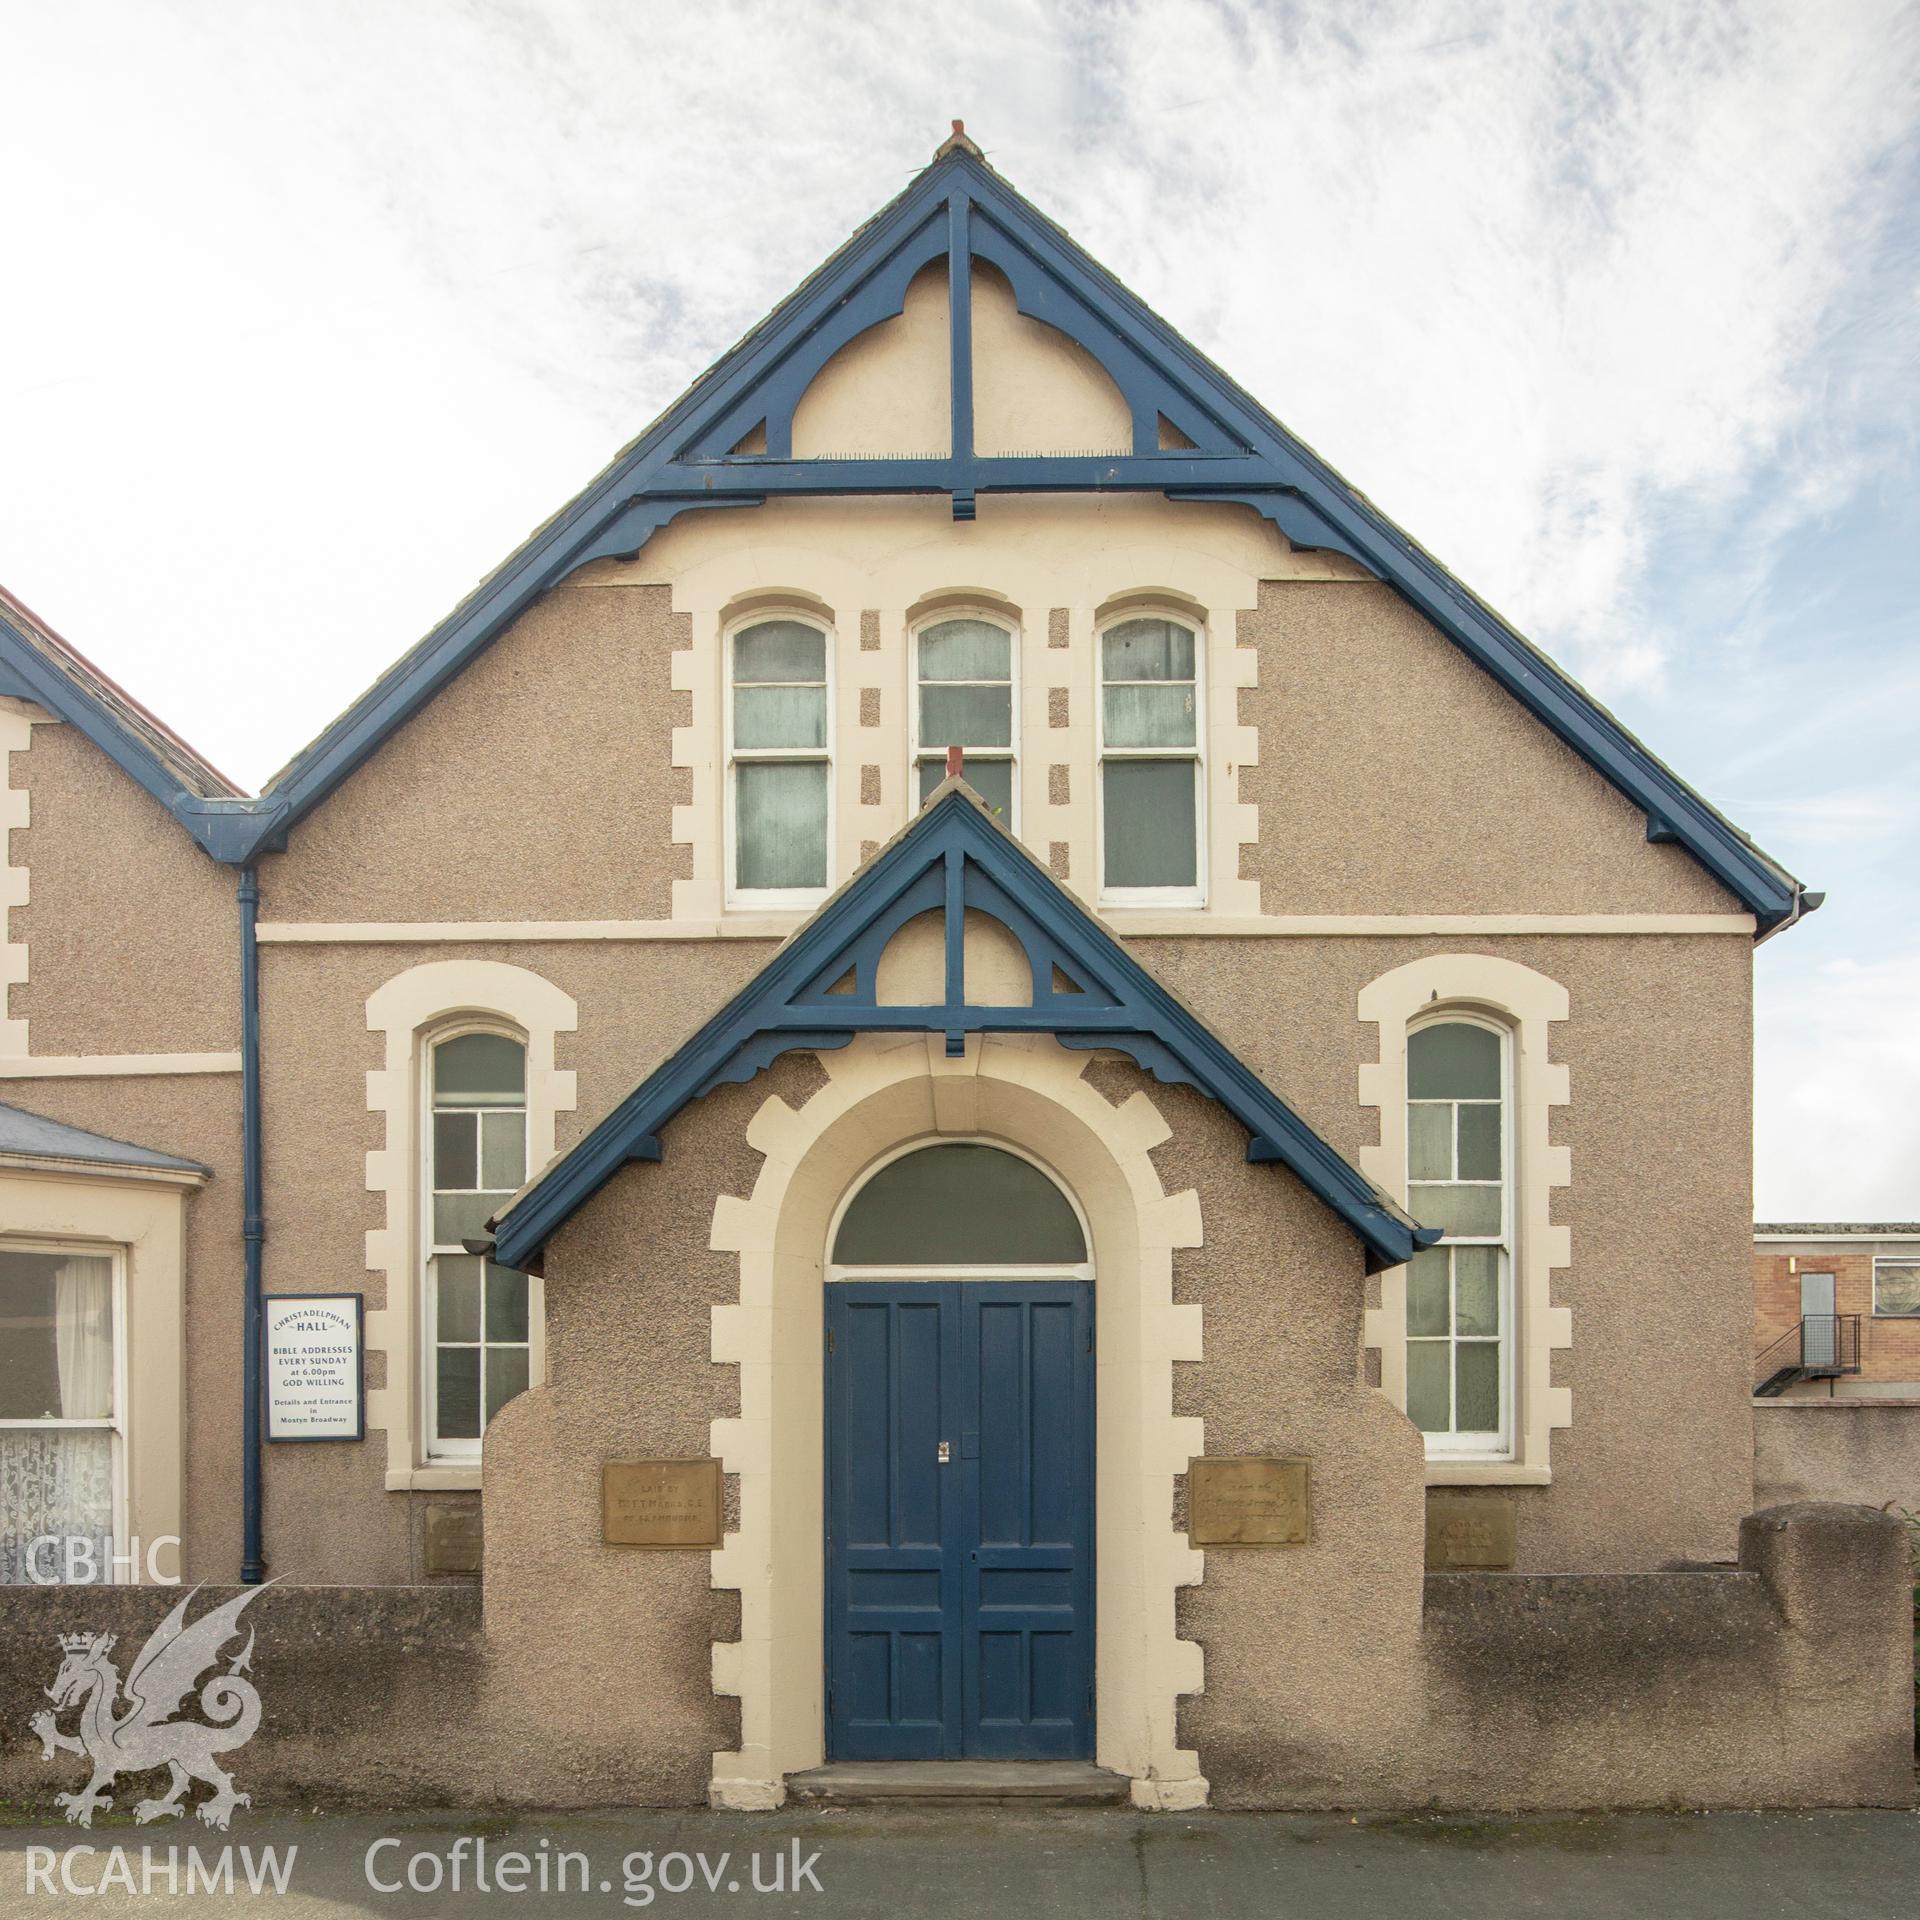 Colour photograph showing front elevation and entrance of Salem Baptist Chapel, Adelphi St, and Mostyn Broadway, Llandudno. Photographed by Richard Barrett on 17th September 2018.